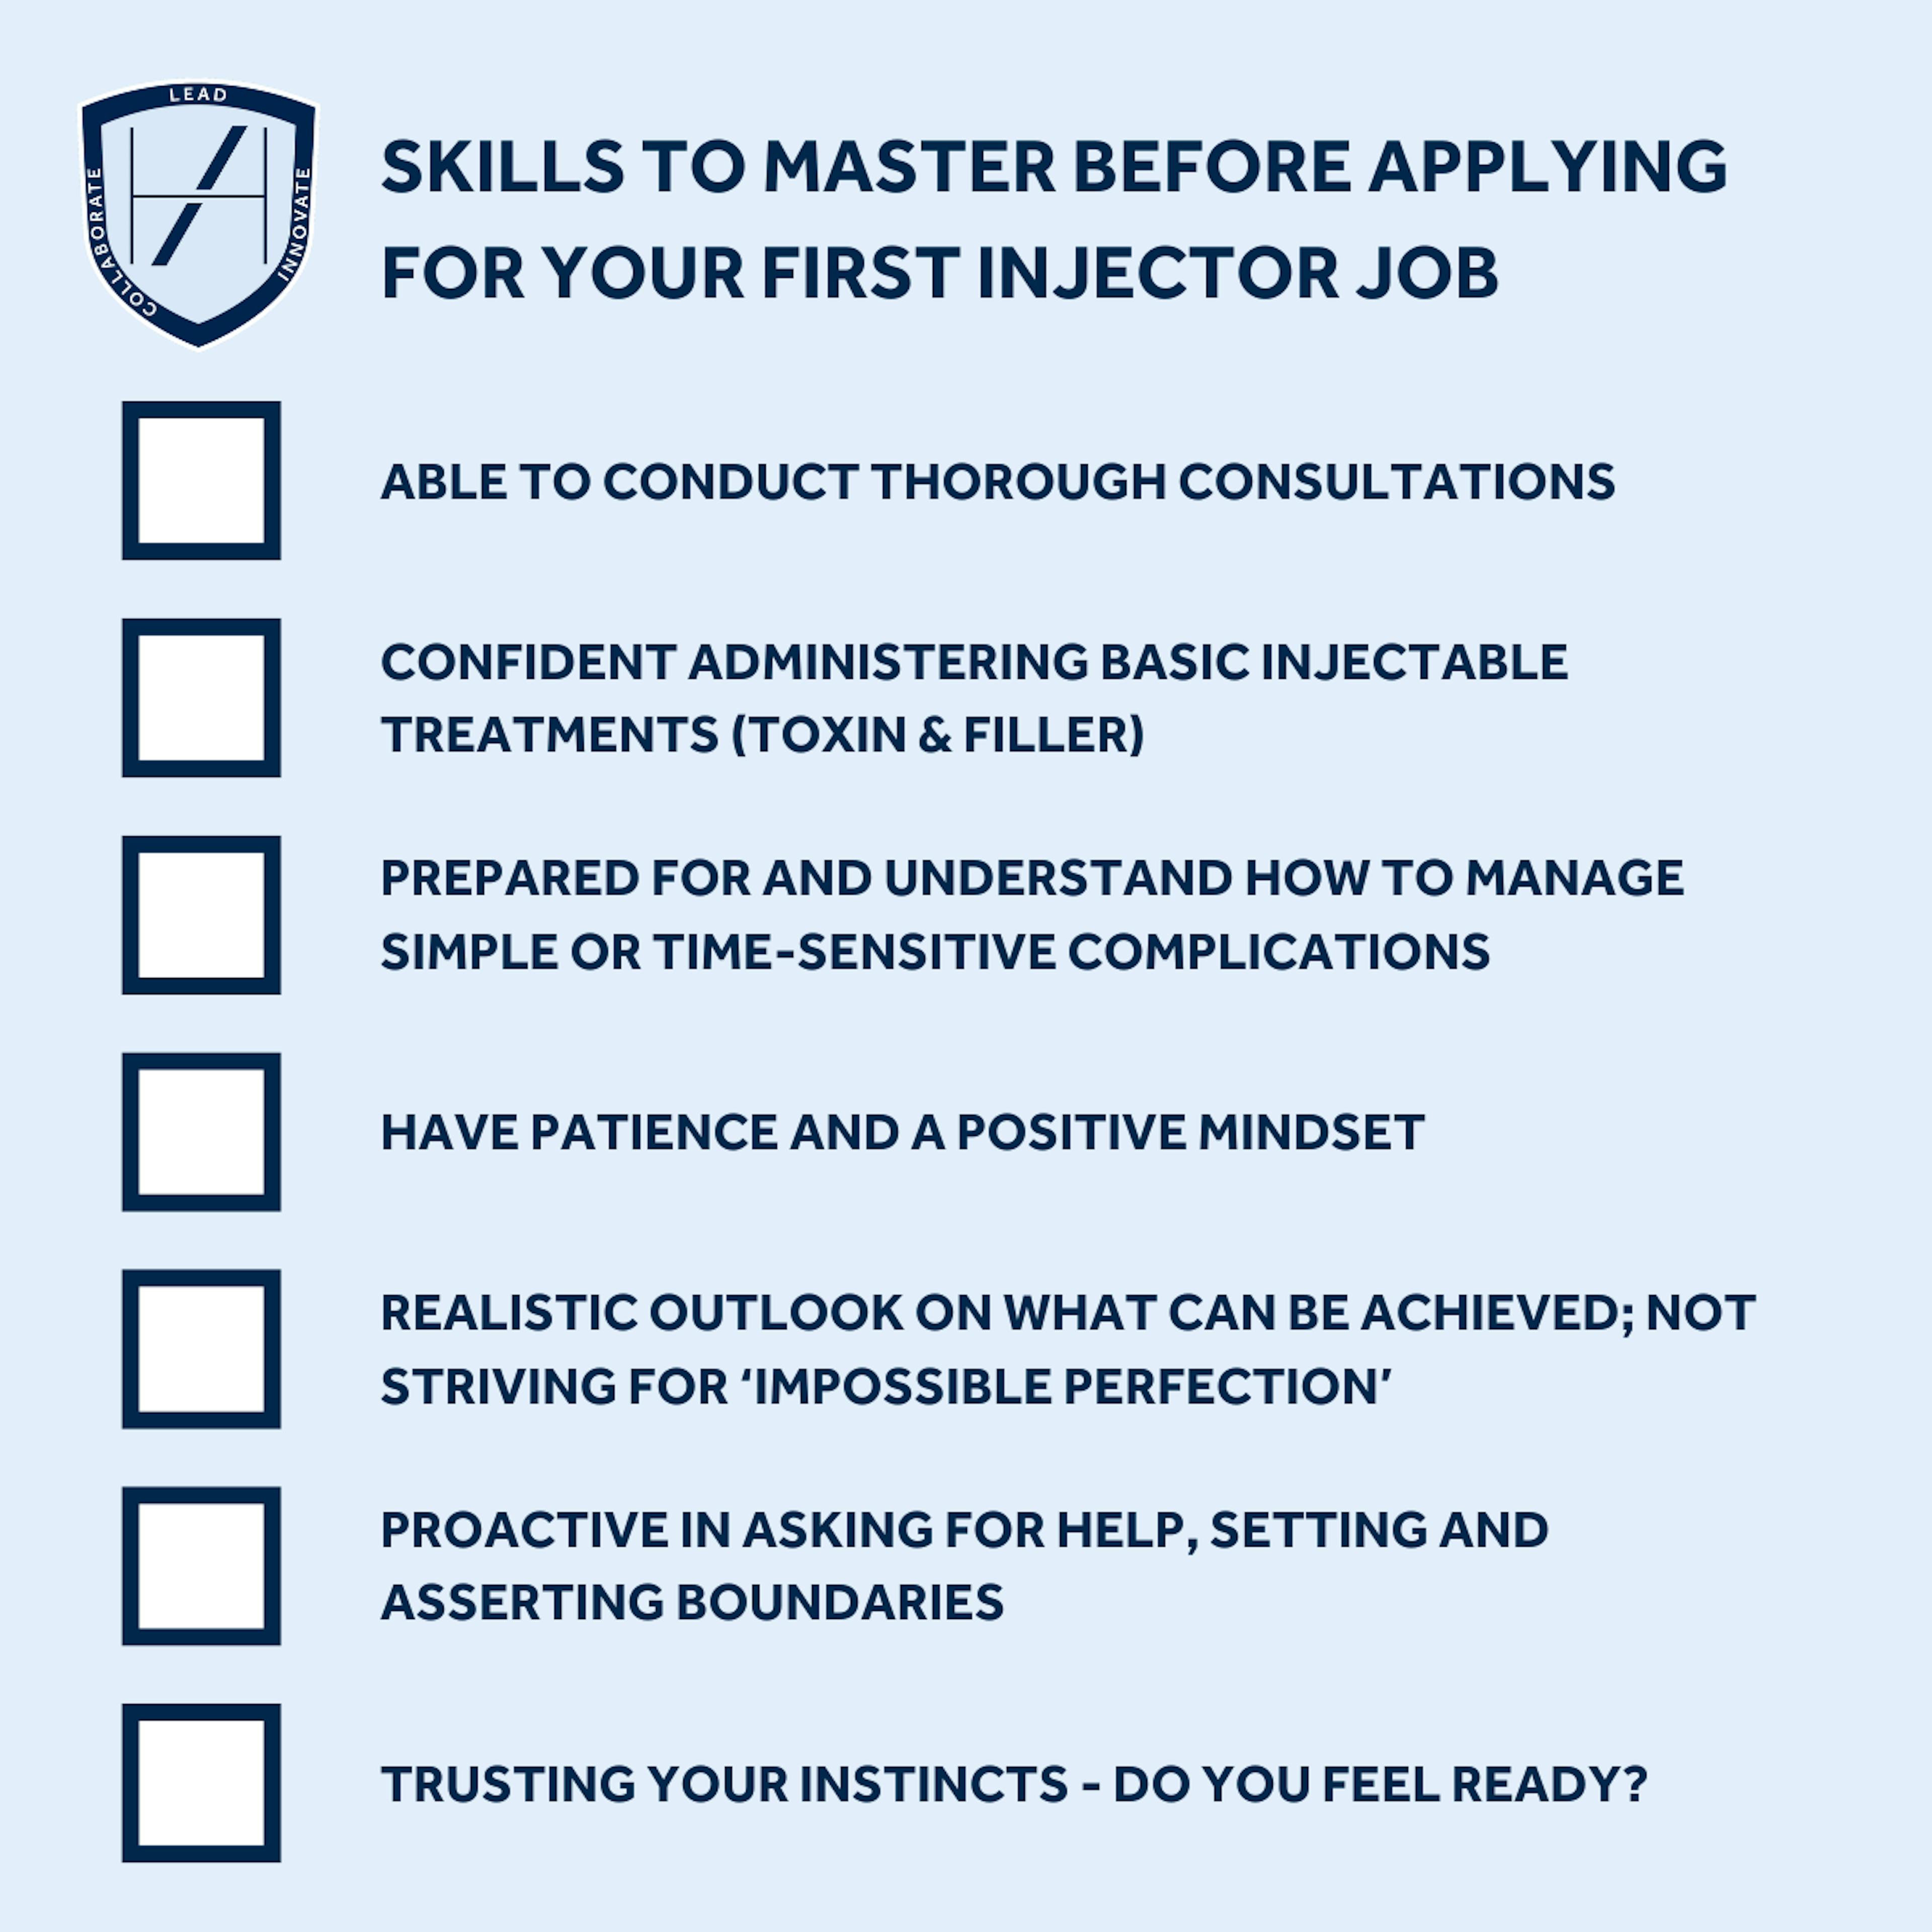 CHECKLIST OF SKILLS TO MASTER BEFORE APPLYING FOR YOUR FIRST JOB AS AN AESTHETICS PRACTITIONER AT A COSMETIC CLINIC